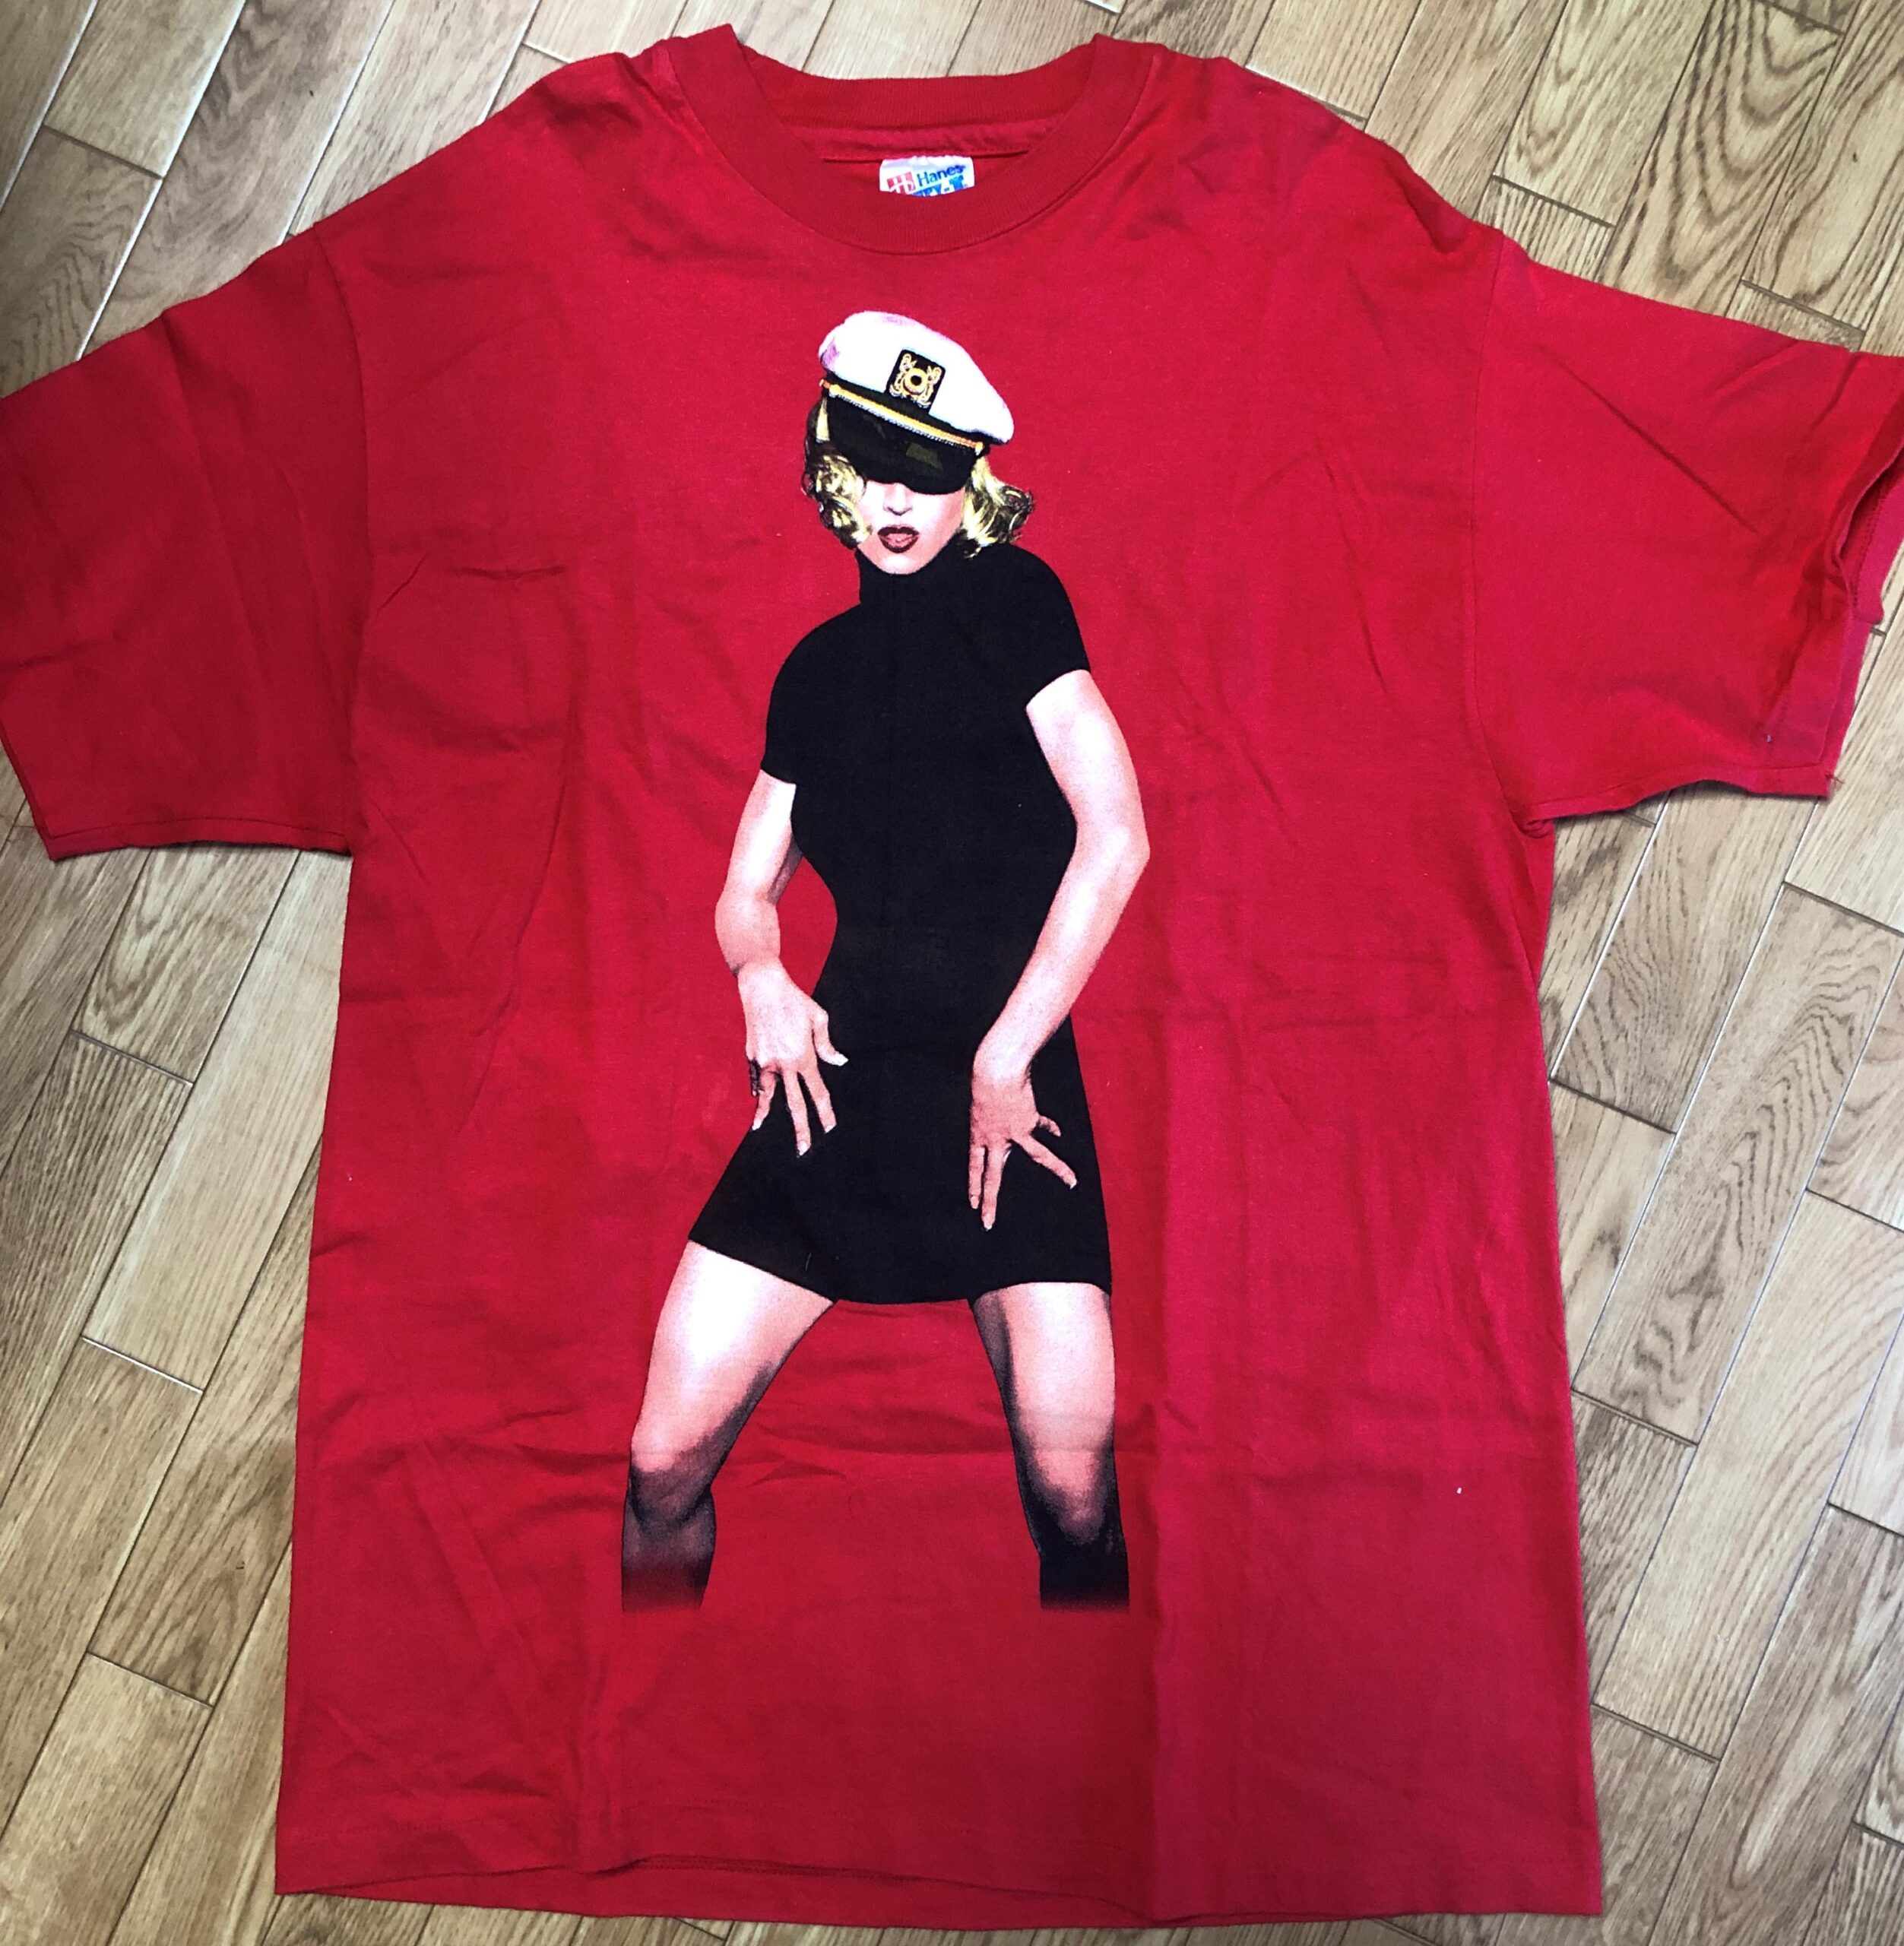 Madonna ☆ Girlie Show World Tour 93′ Tee L size RED | メンズ